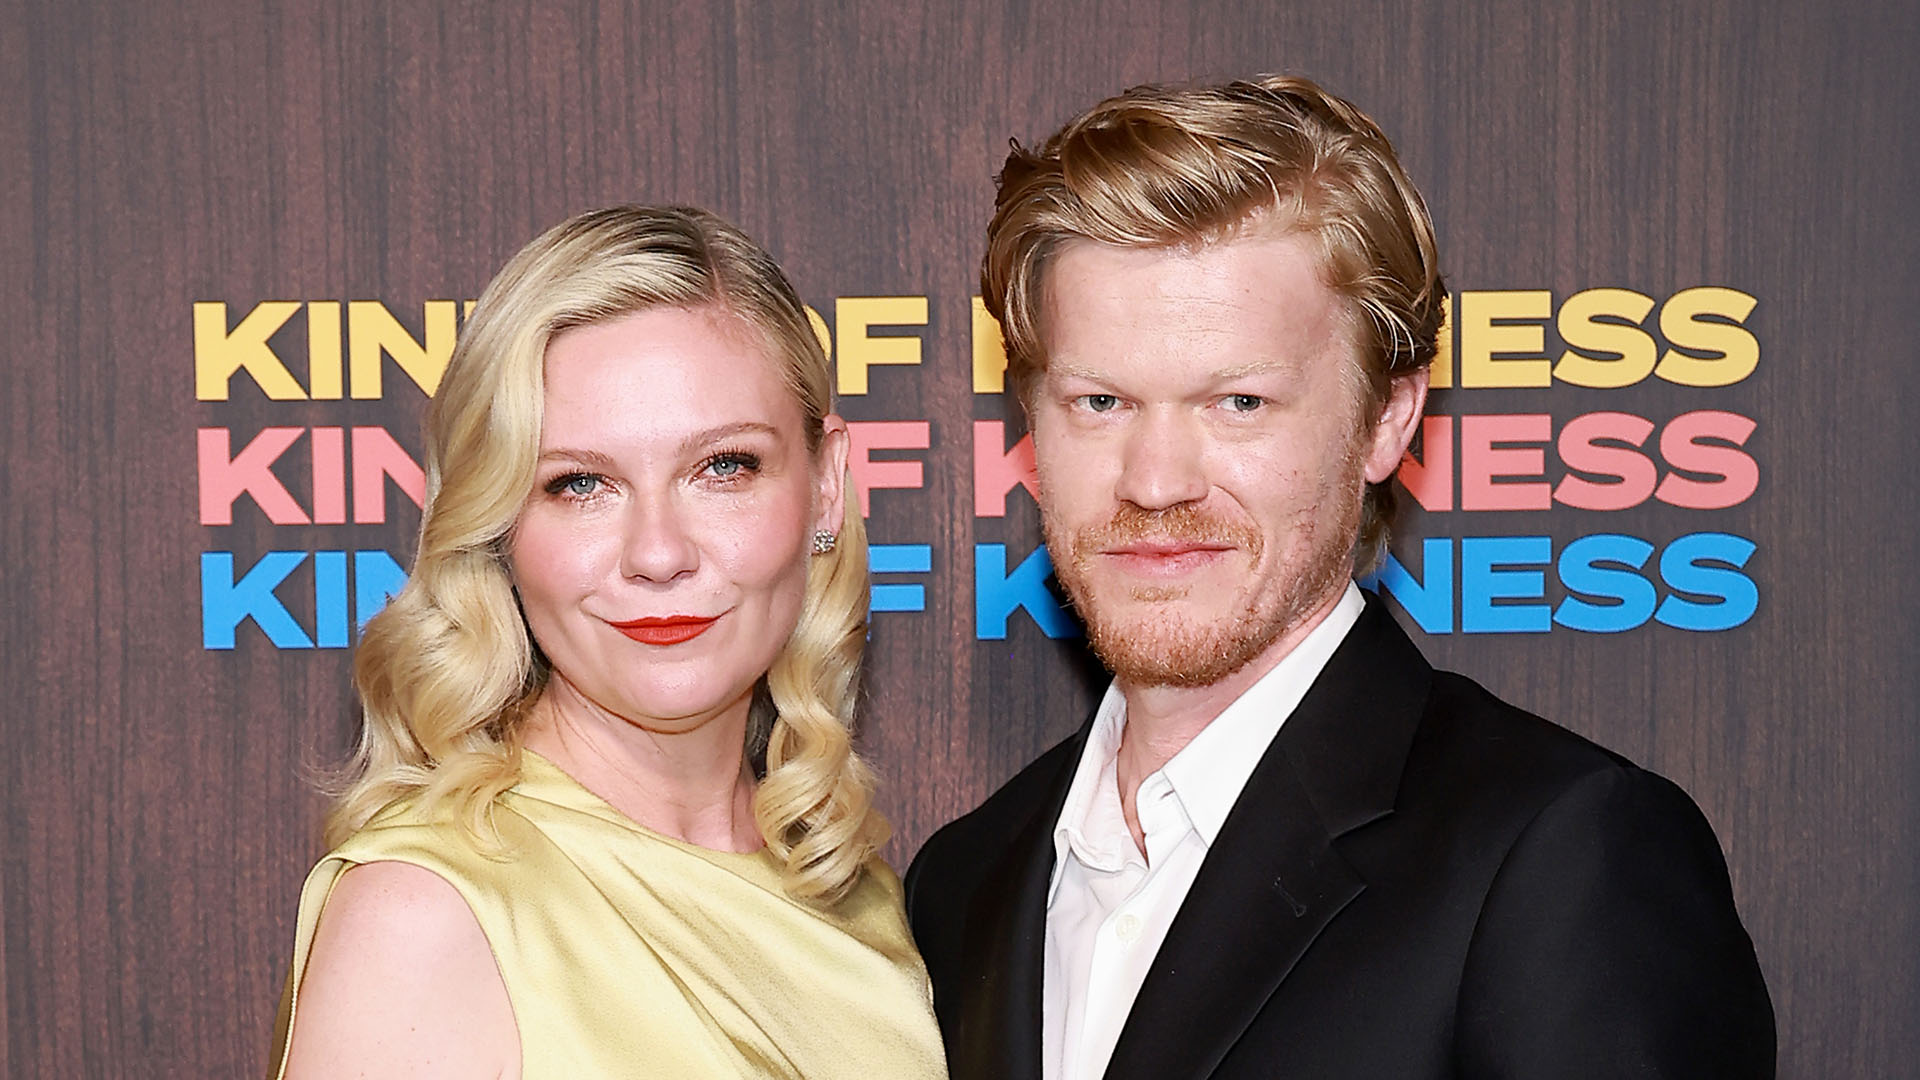 Kinds of Kindness’ Jesse Plemons debuts 50-lb weight loss after sharing ‘unfortunate’ downside to trim figure [Video]